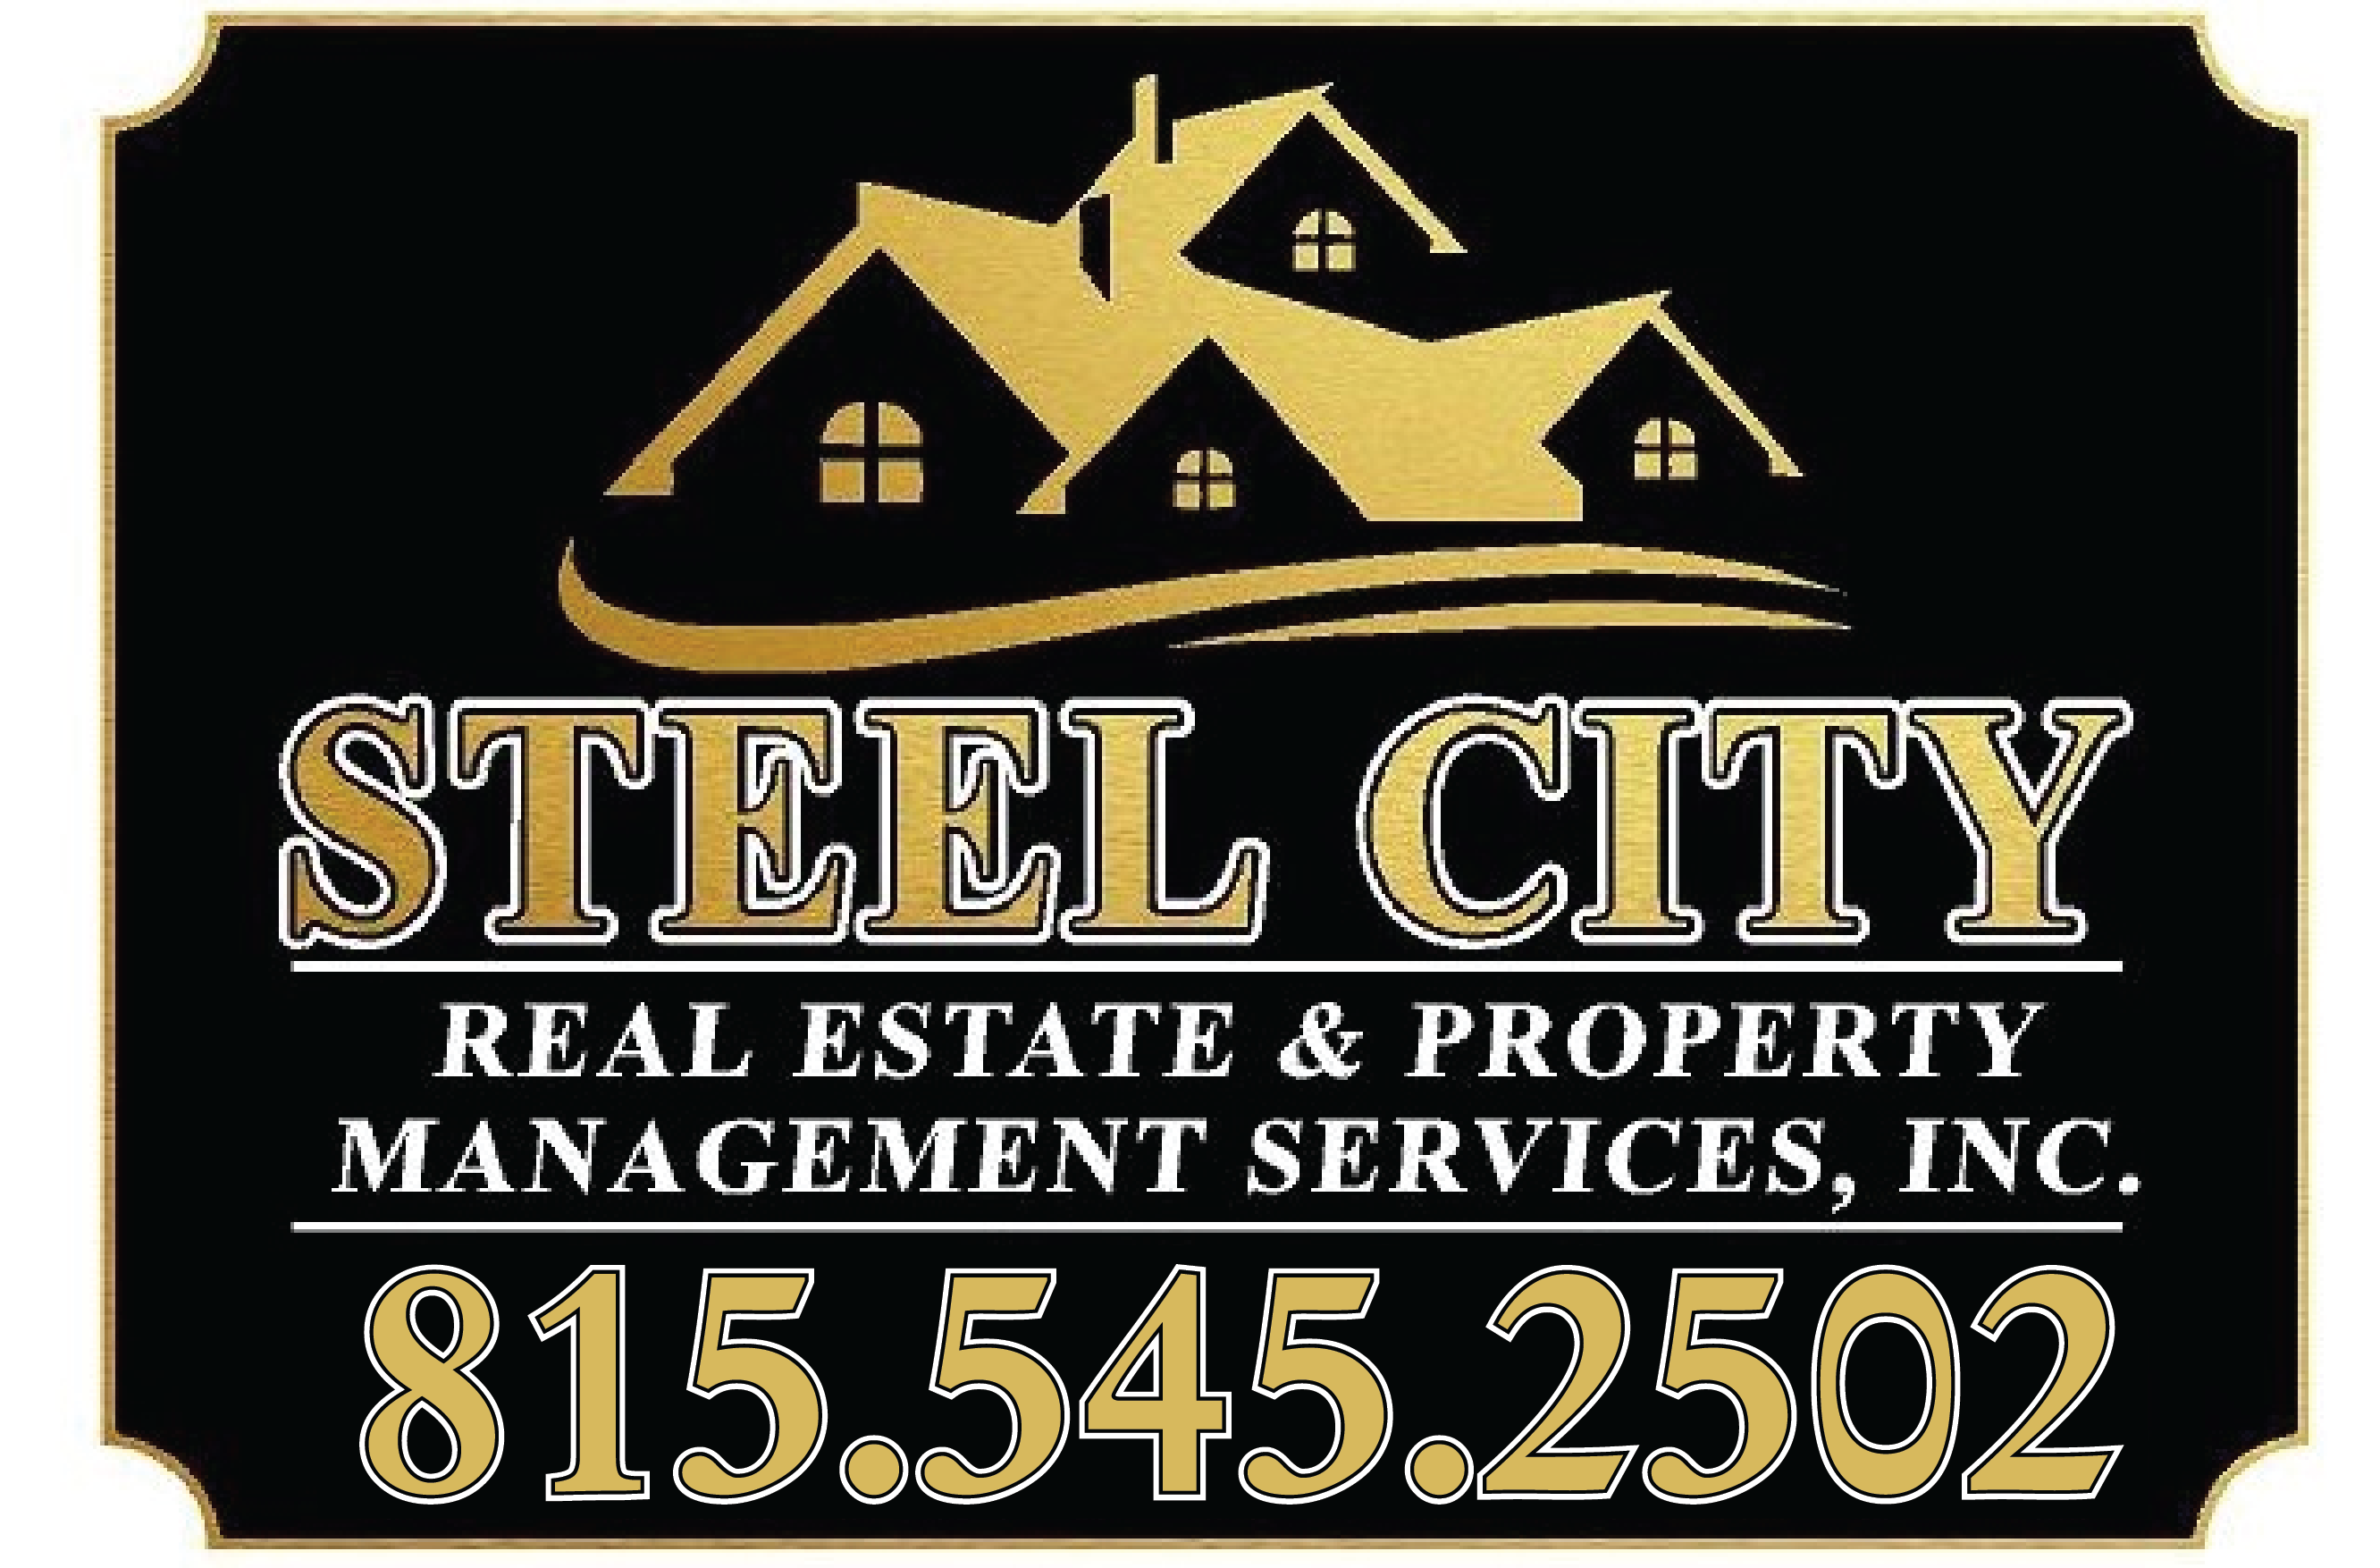 Steel City Real Estate and Property Management Services, INC. logo